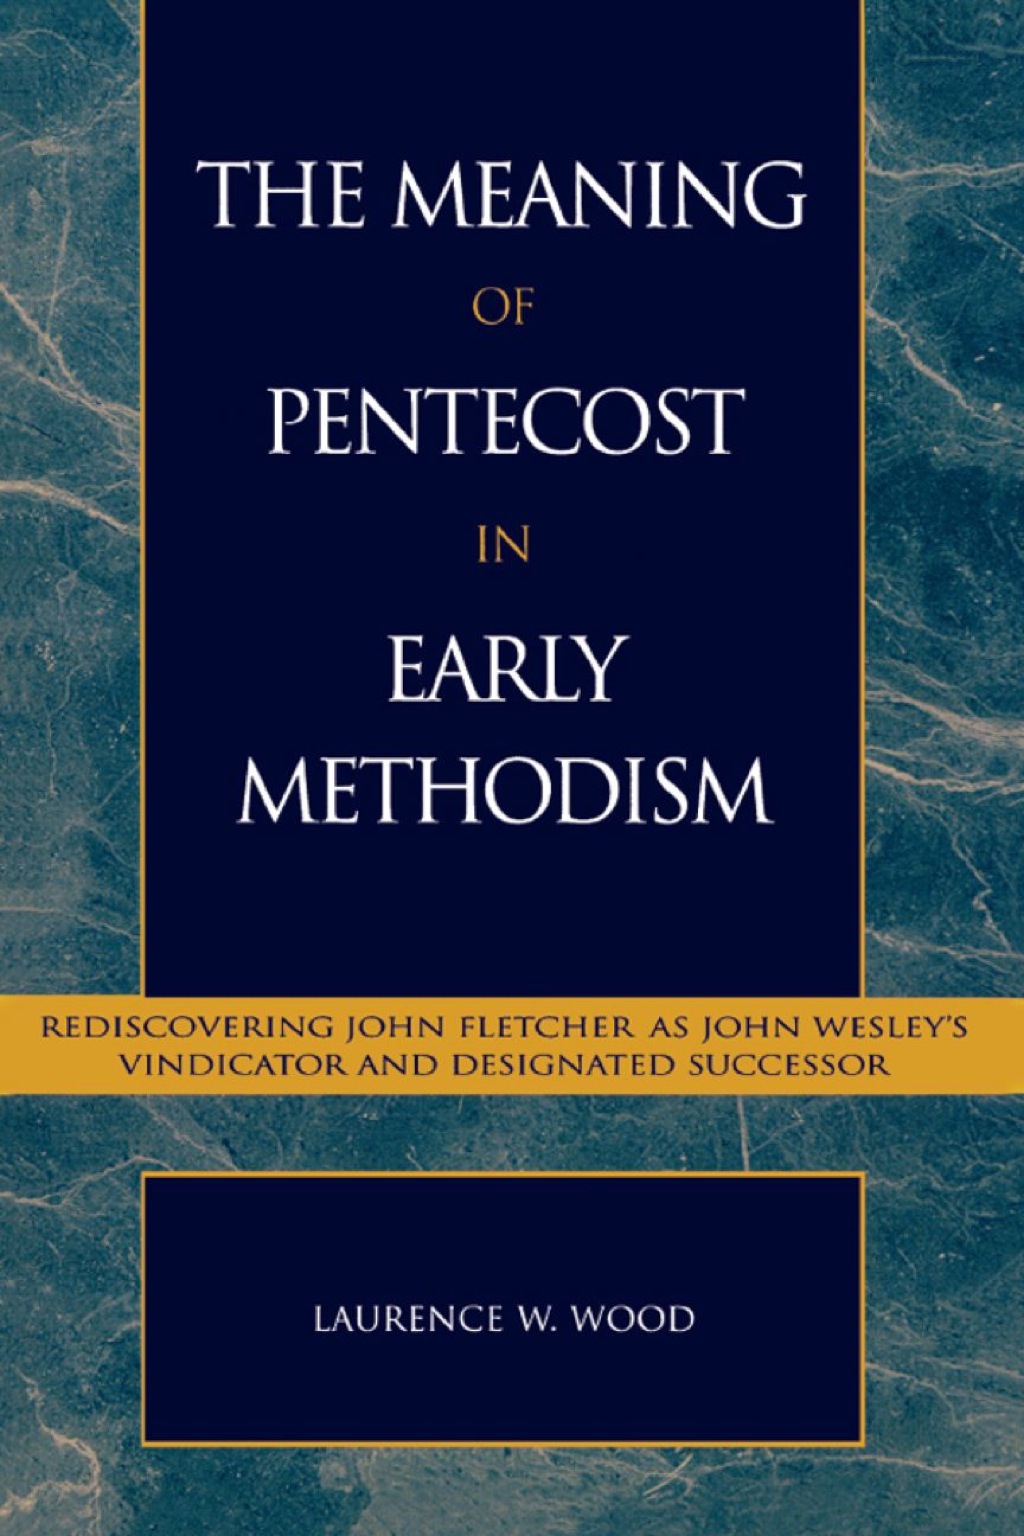 The Meaning of Pentecost in Early Methodism (eBook Rental) - Laurence W. Wood,